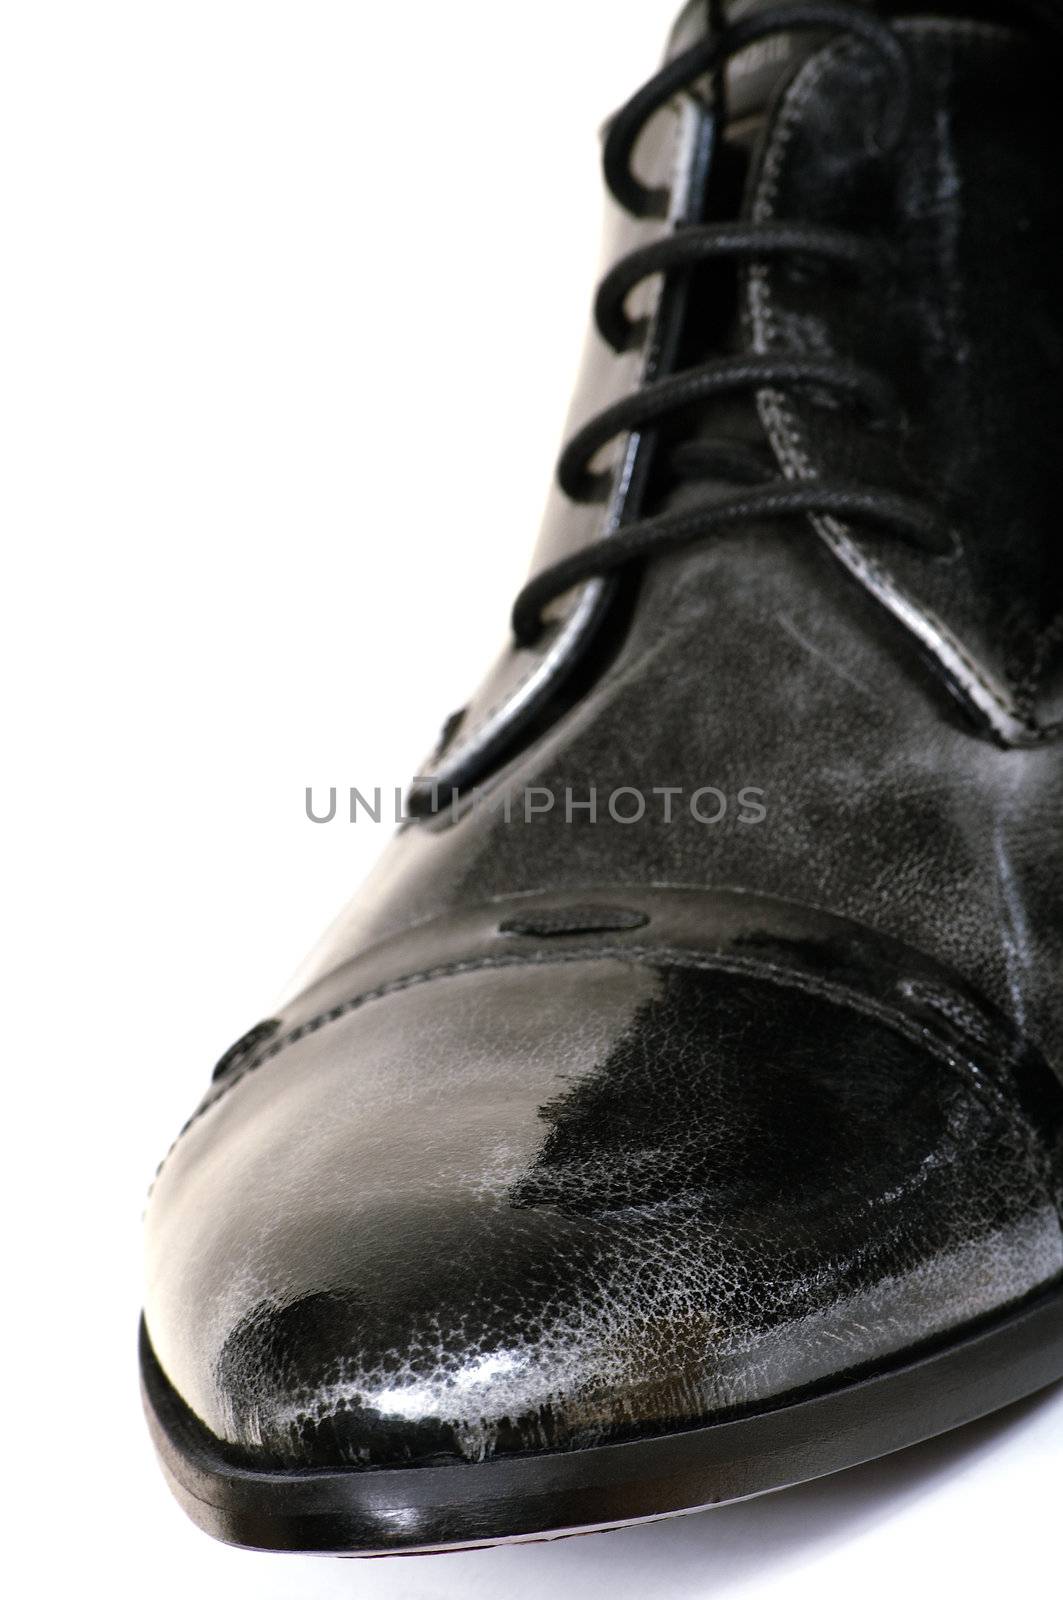 Black man's boot on a white background